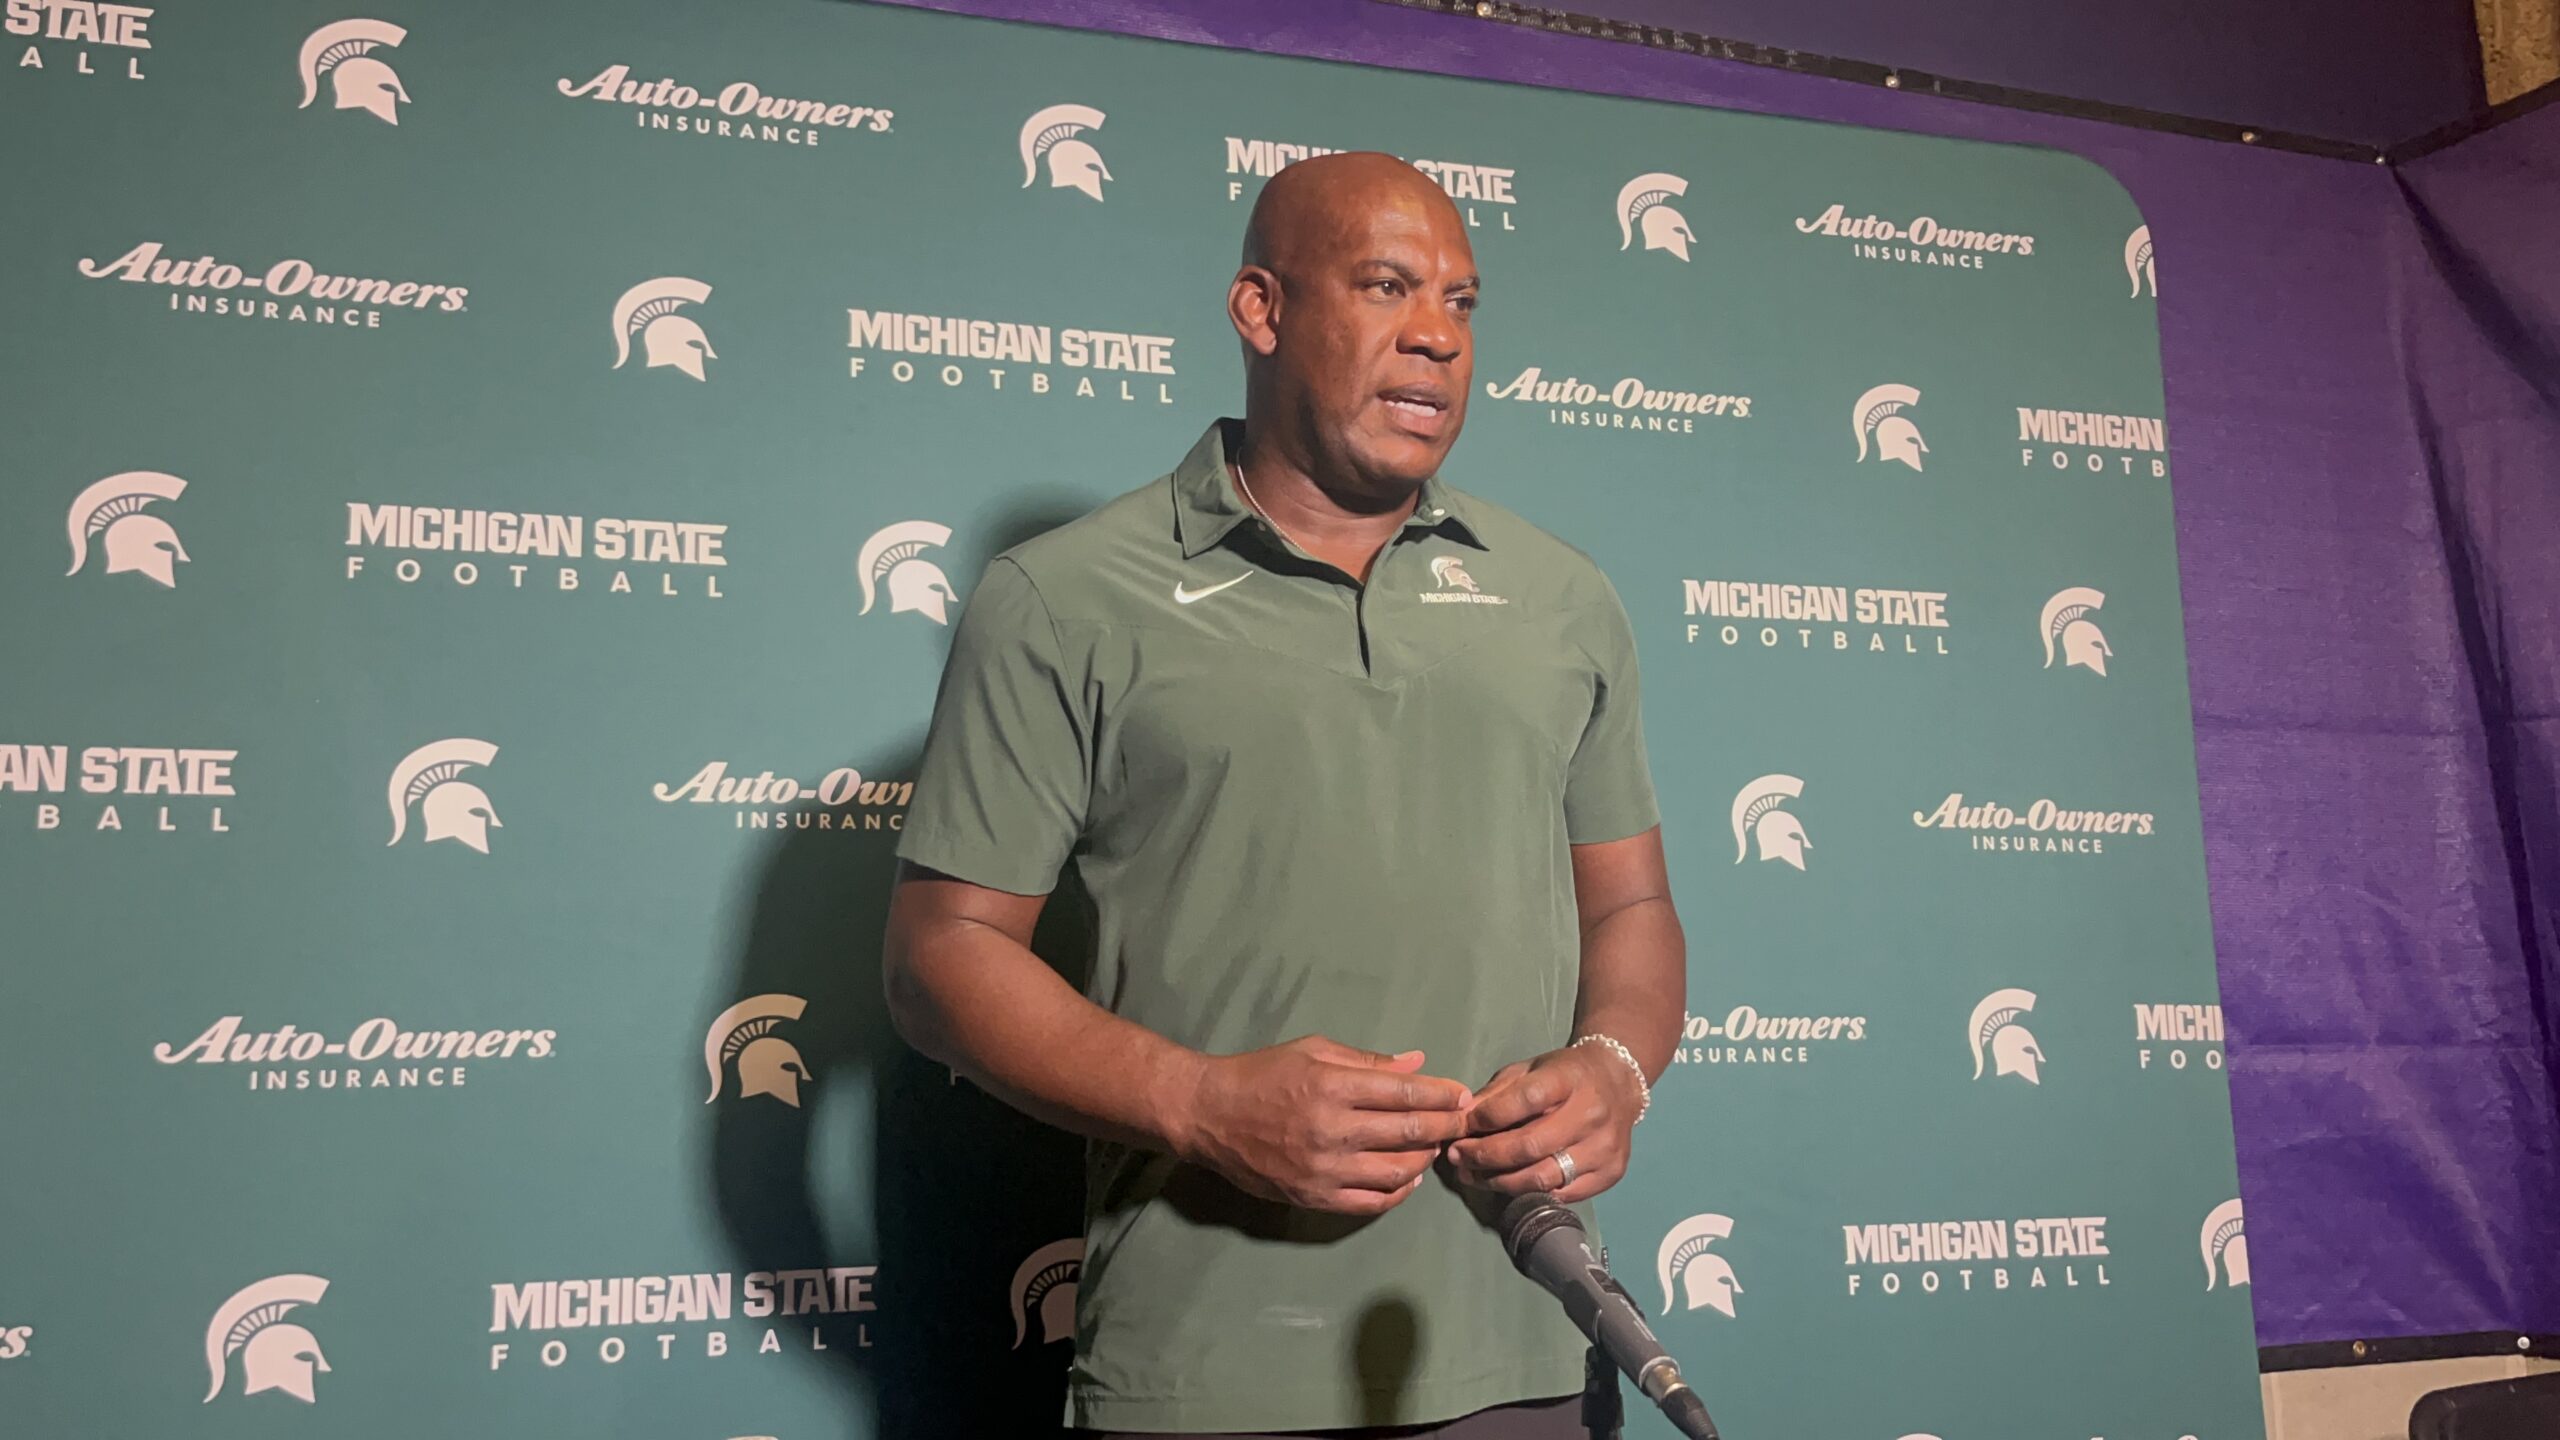 Michigan State's Mel Tucker Calls Husky QB Penix “One of the best players in the country”